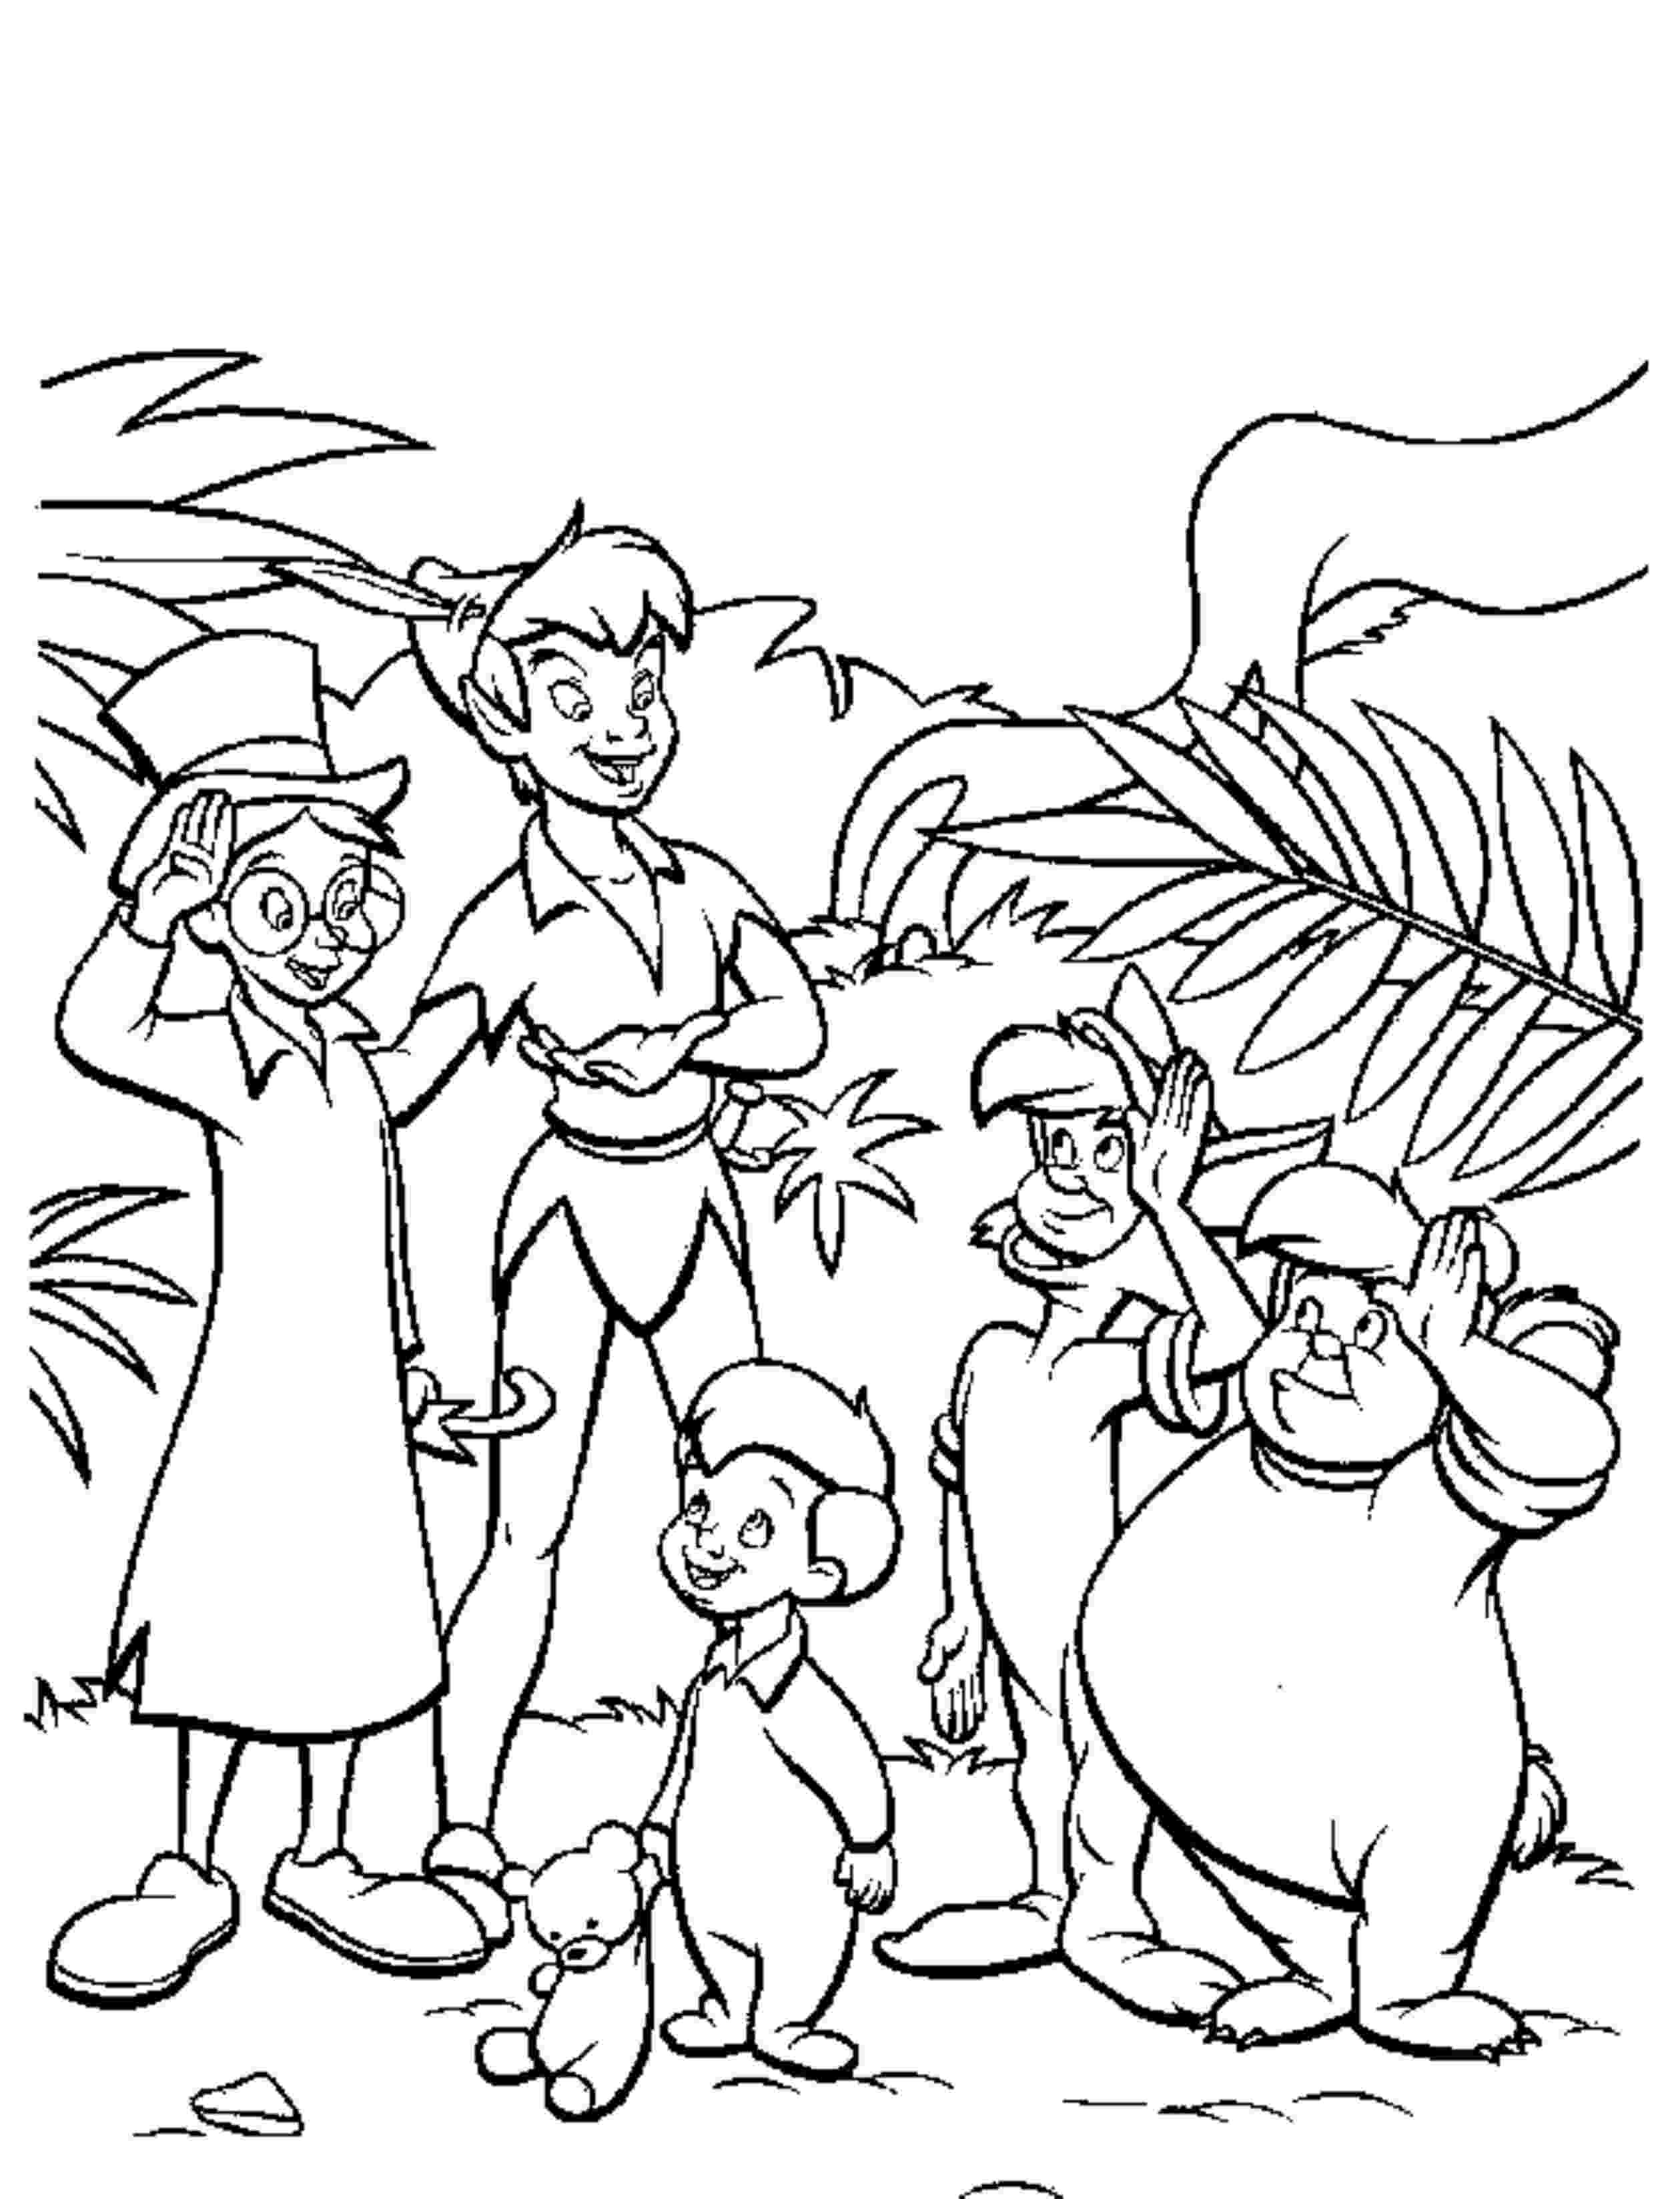 Lost Boys Coloring Pages Printable
 Printable Peter Pan Coloring Pages Coloring Home